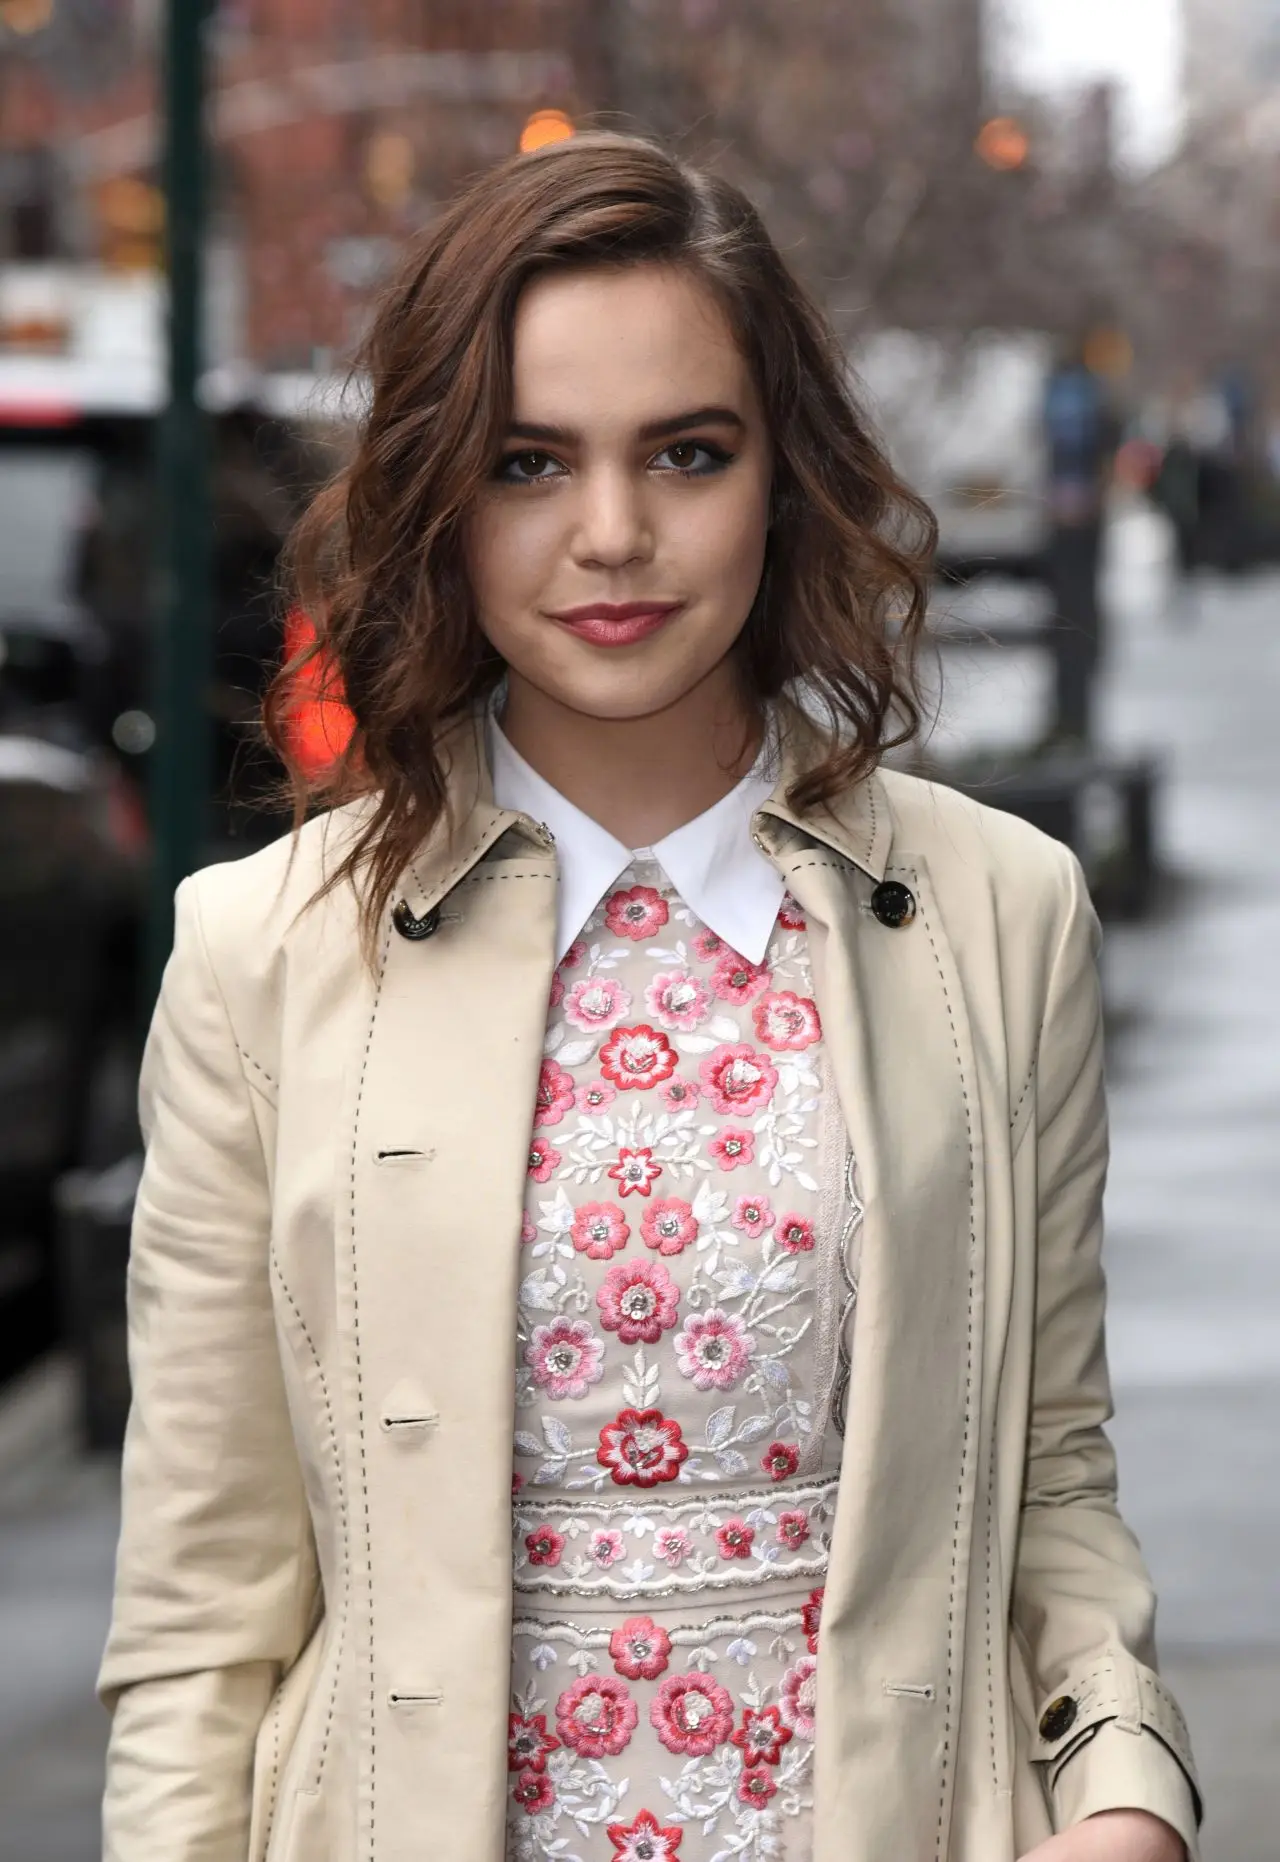 BAILEE MADISON AT ARRIVES TO AOL BUILD SERIES IN NEW YORK